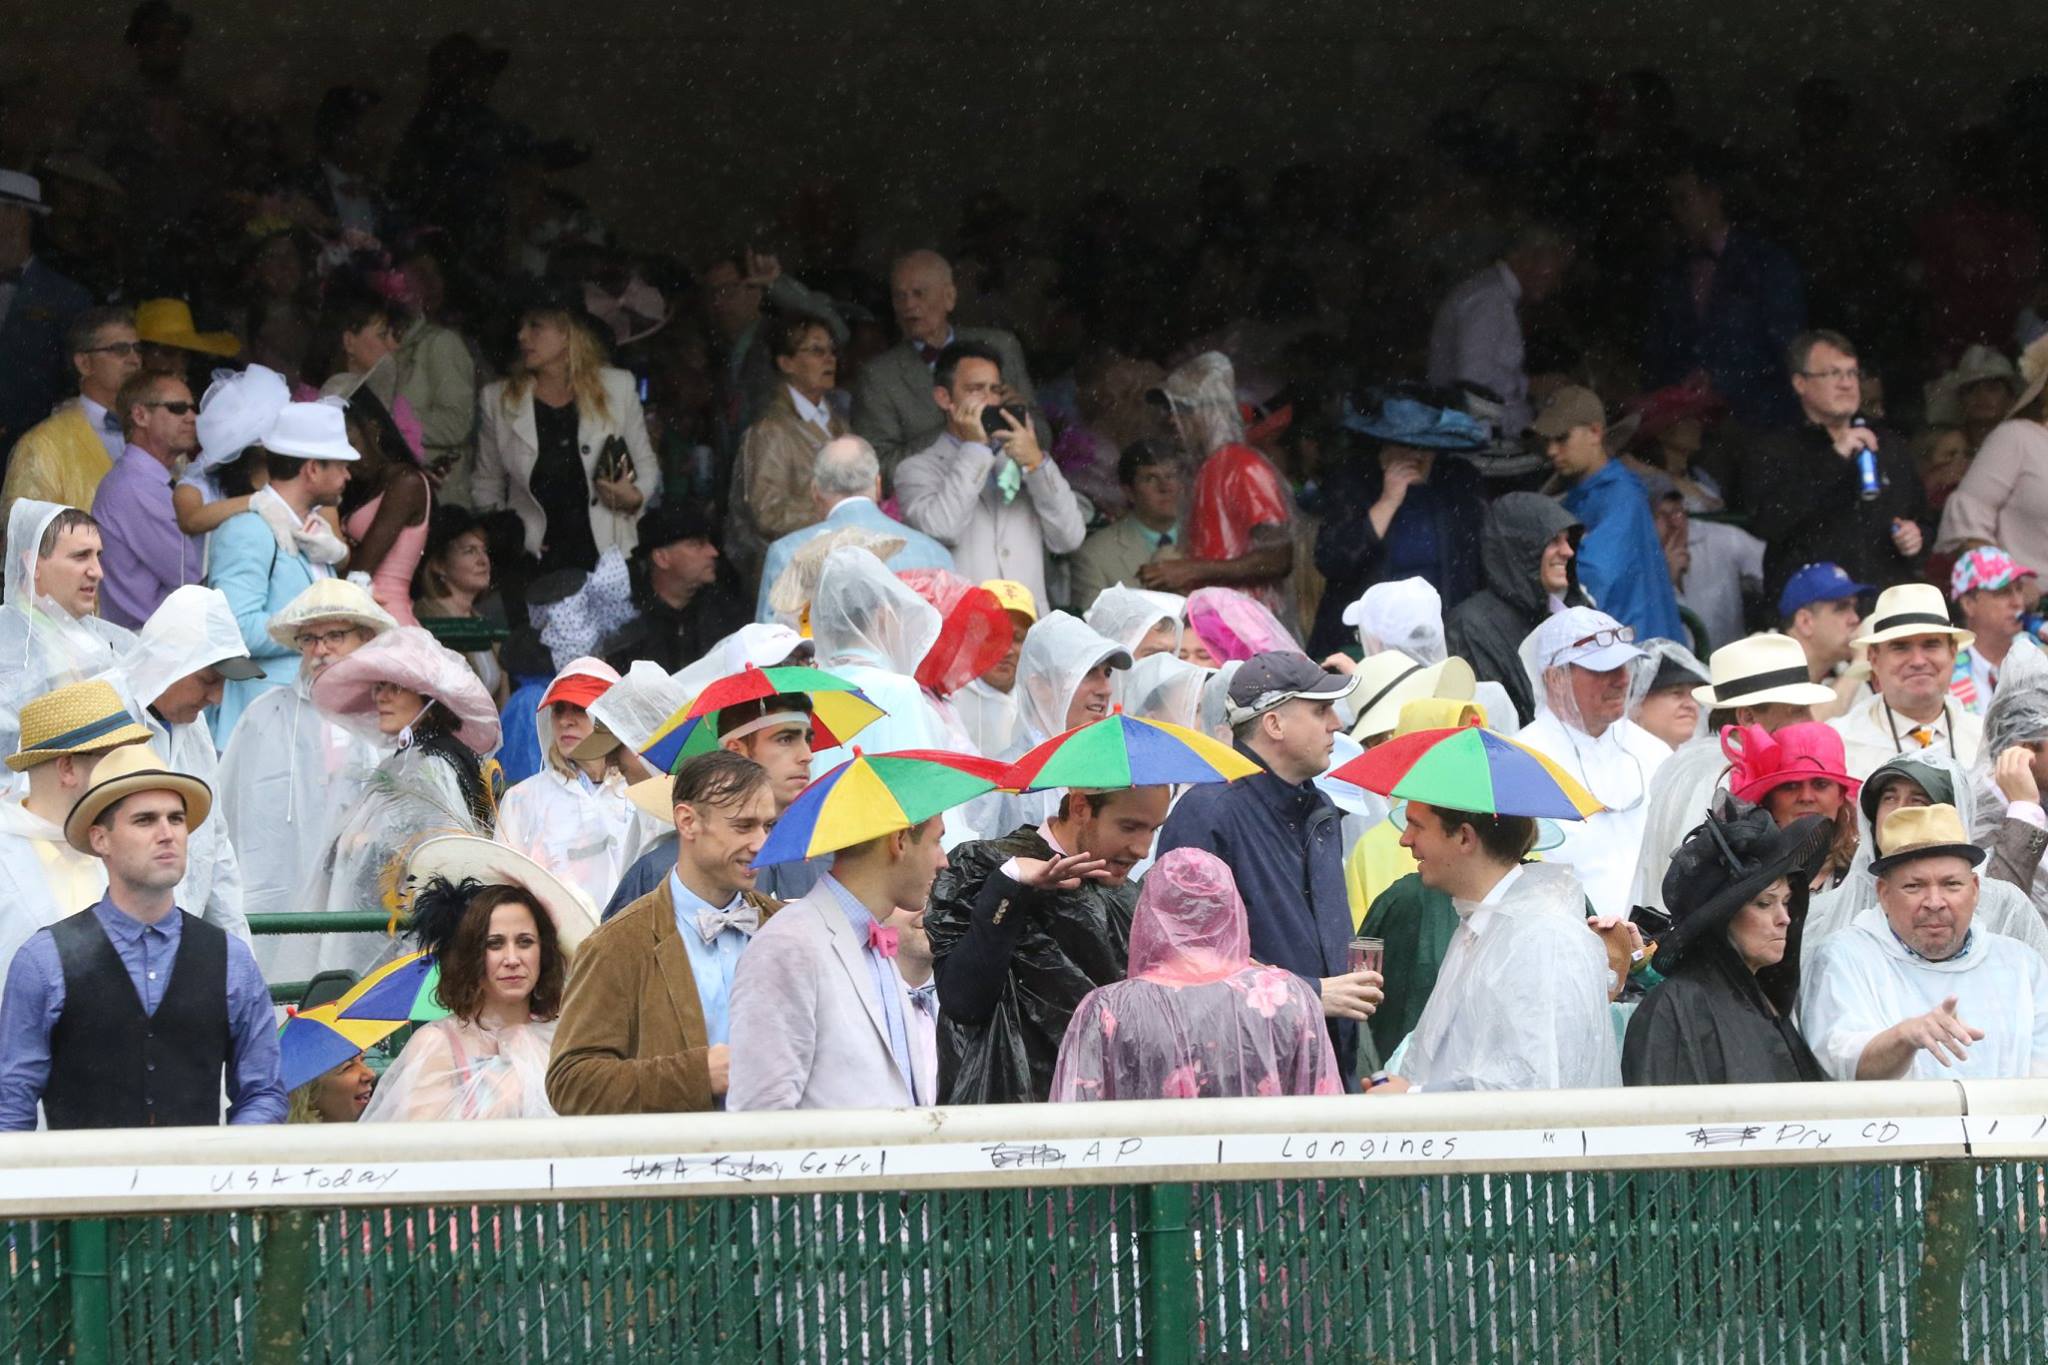 Crowd at the 2018 Kentucky Derby